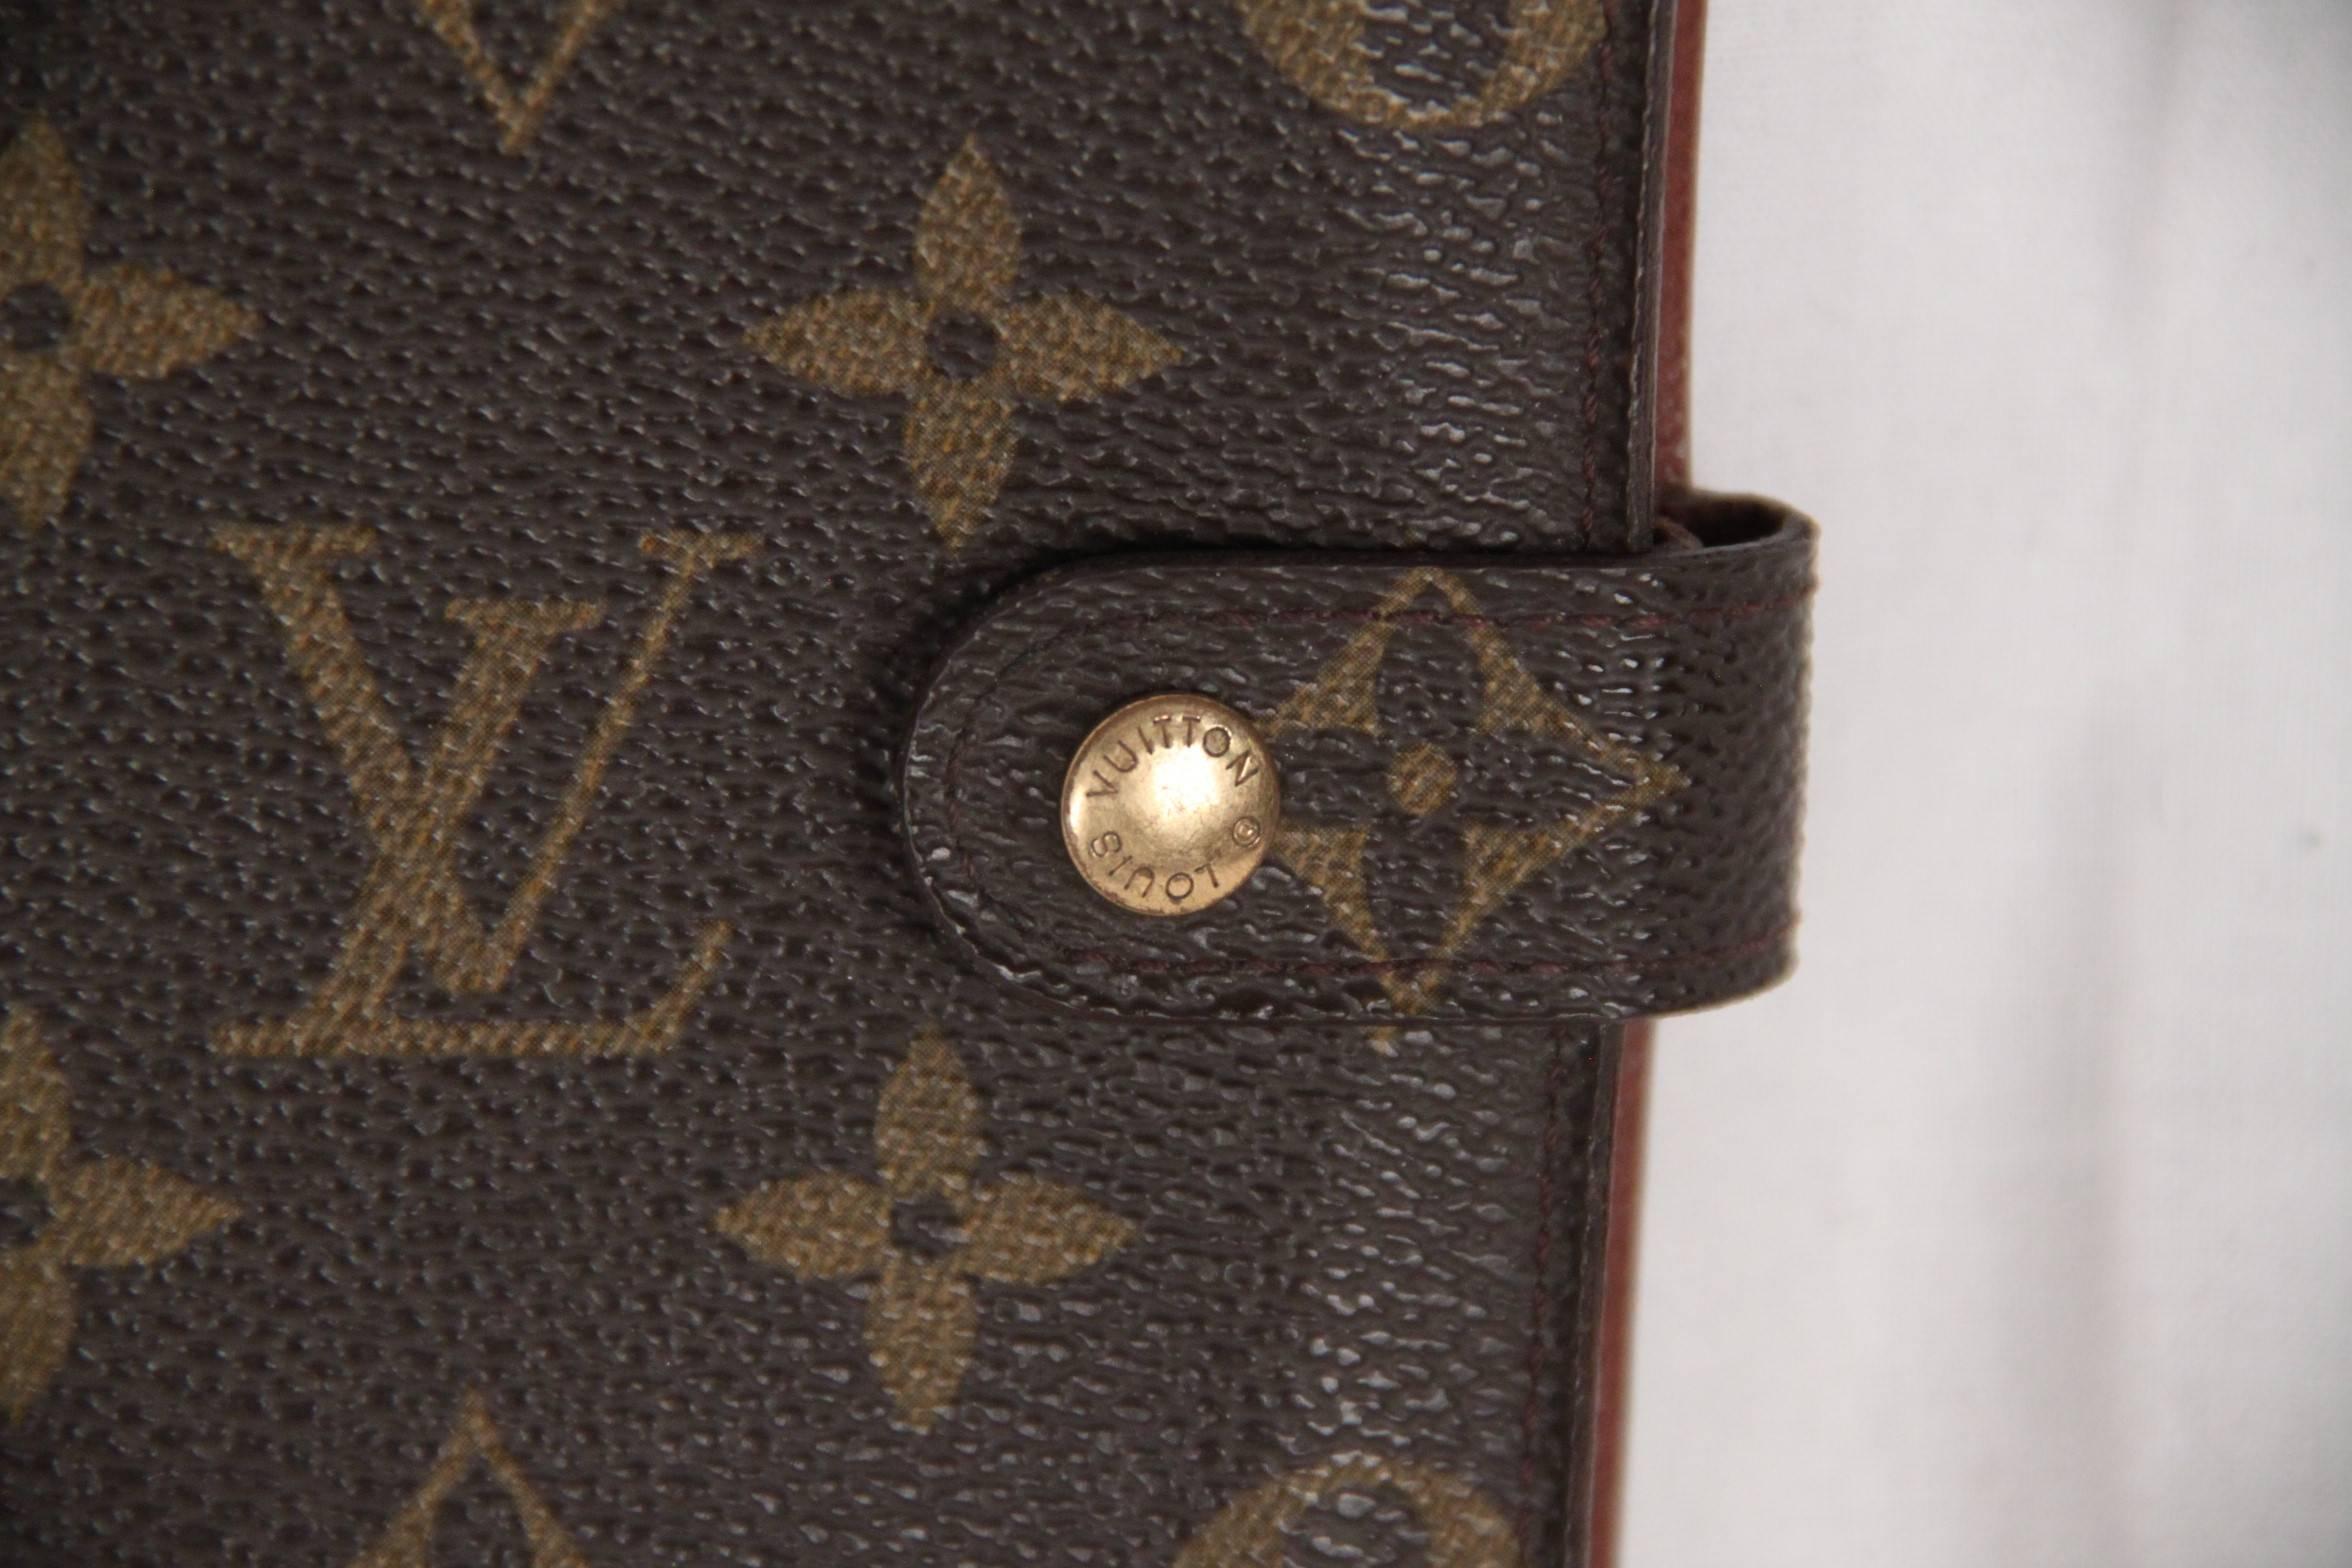 Brand: LOUIS VUITTON Paris - Made in France

Logos / Tags: LOUIS VUITTON Monogram Canvas, 'LOUIS VUITTON Paris - Made in France' embossed inside, signed hardware. Authenticity serial number # SP0030 (embossed inside the interior pocket)

Condition: